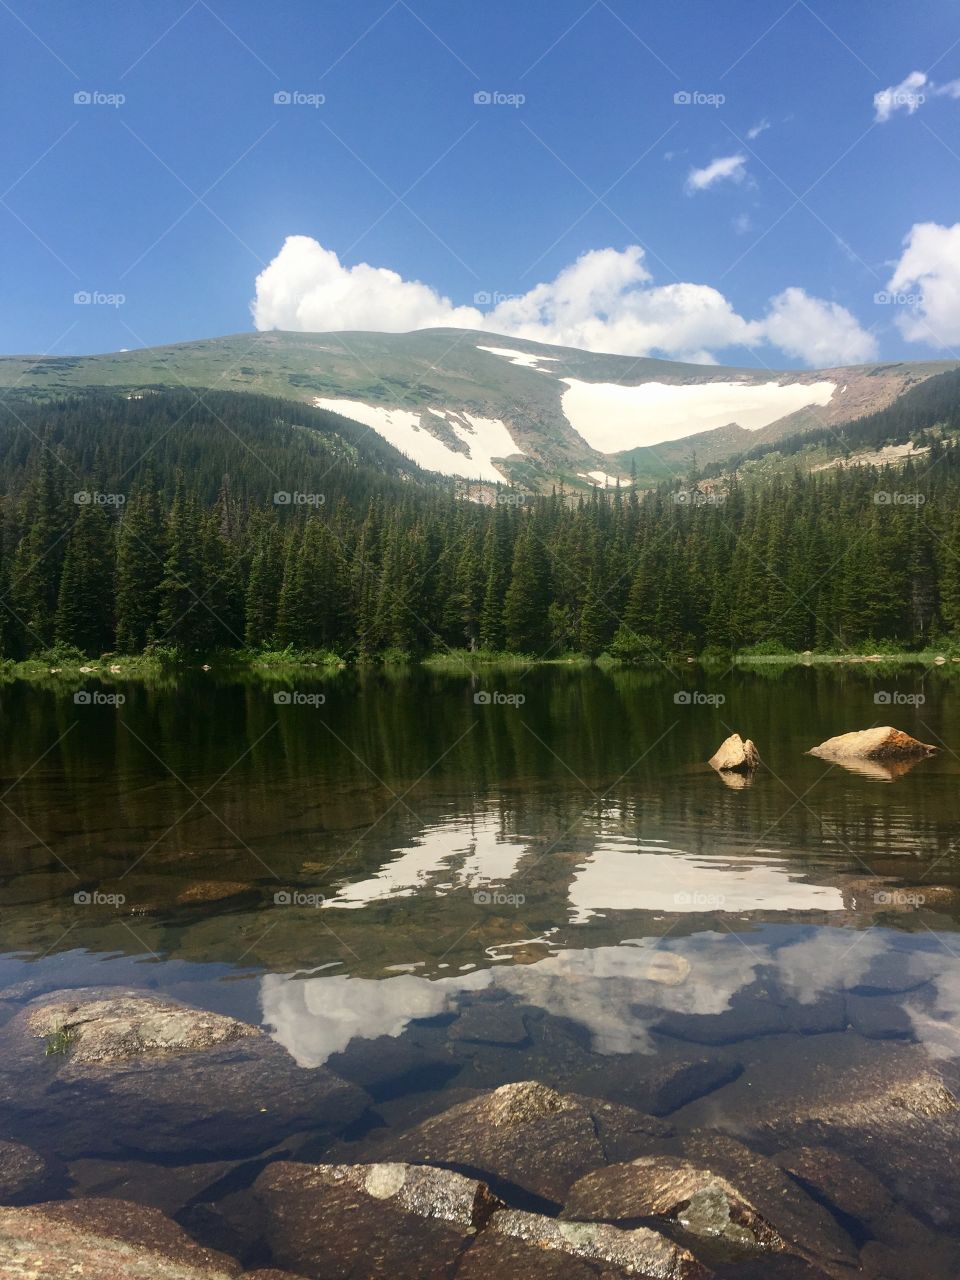 Finding peace in the reflection of Indian Peaks Wilderness